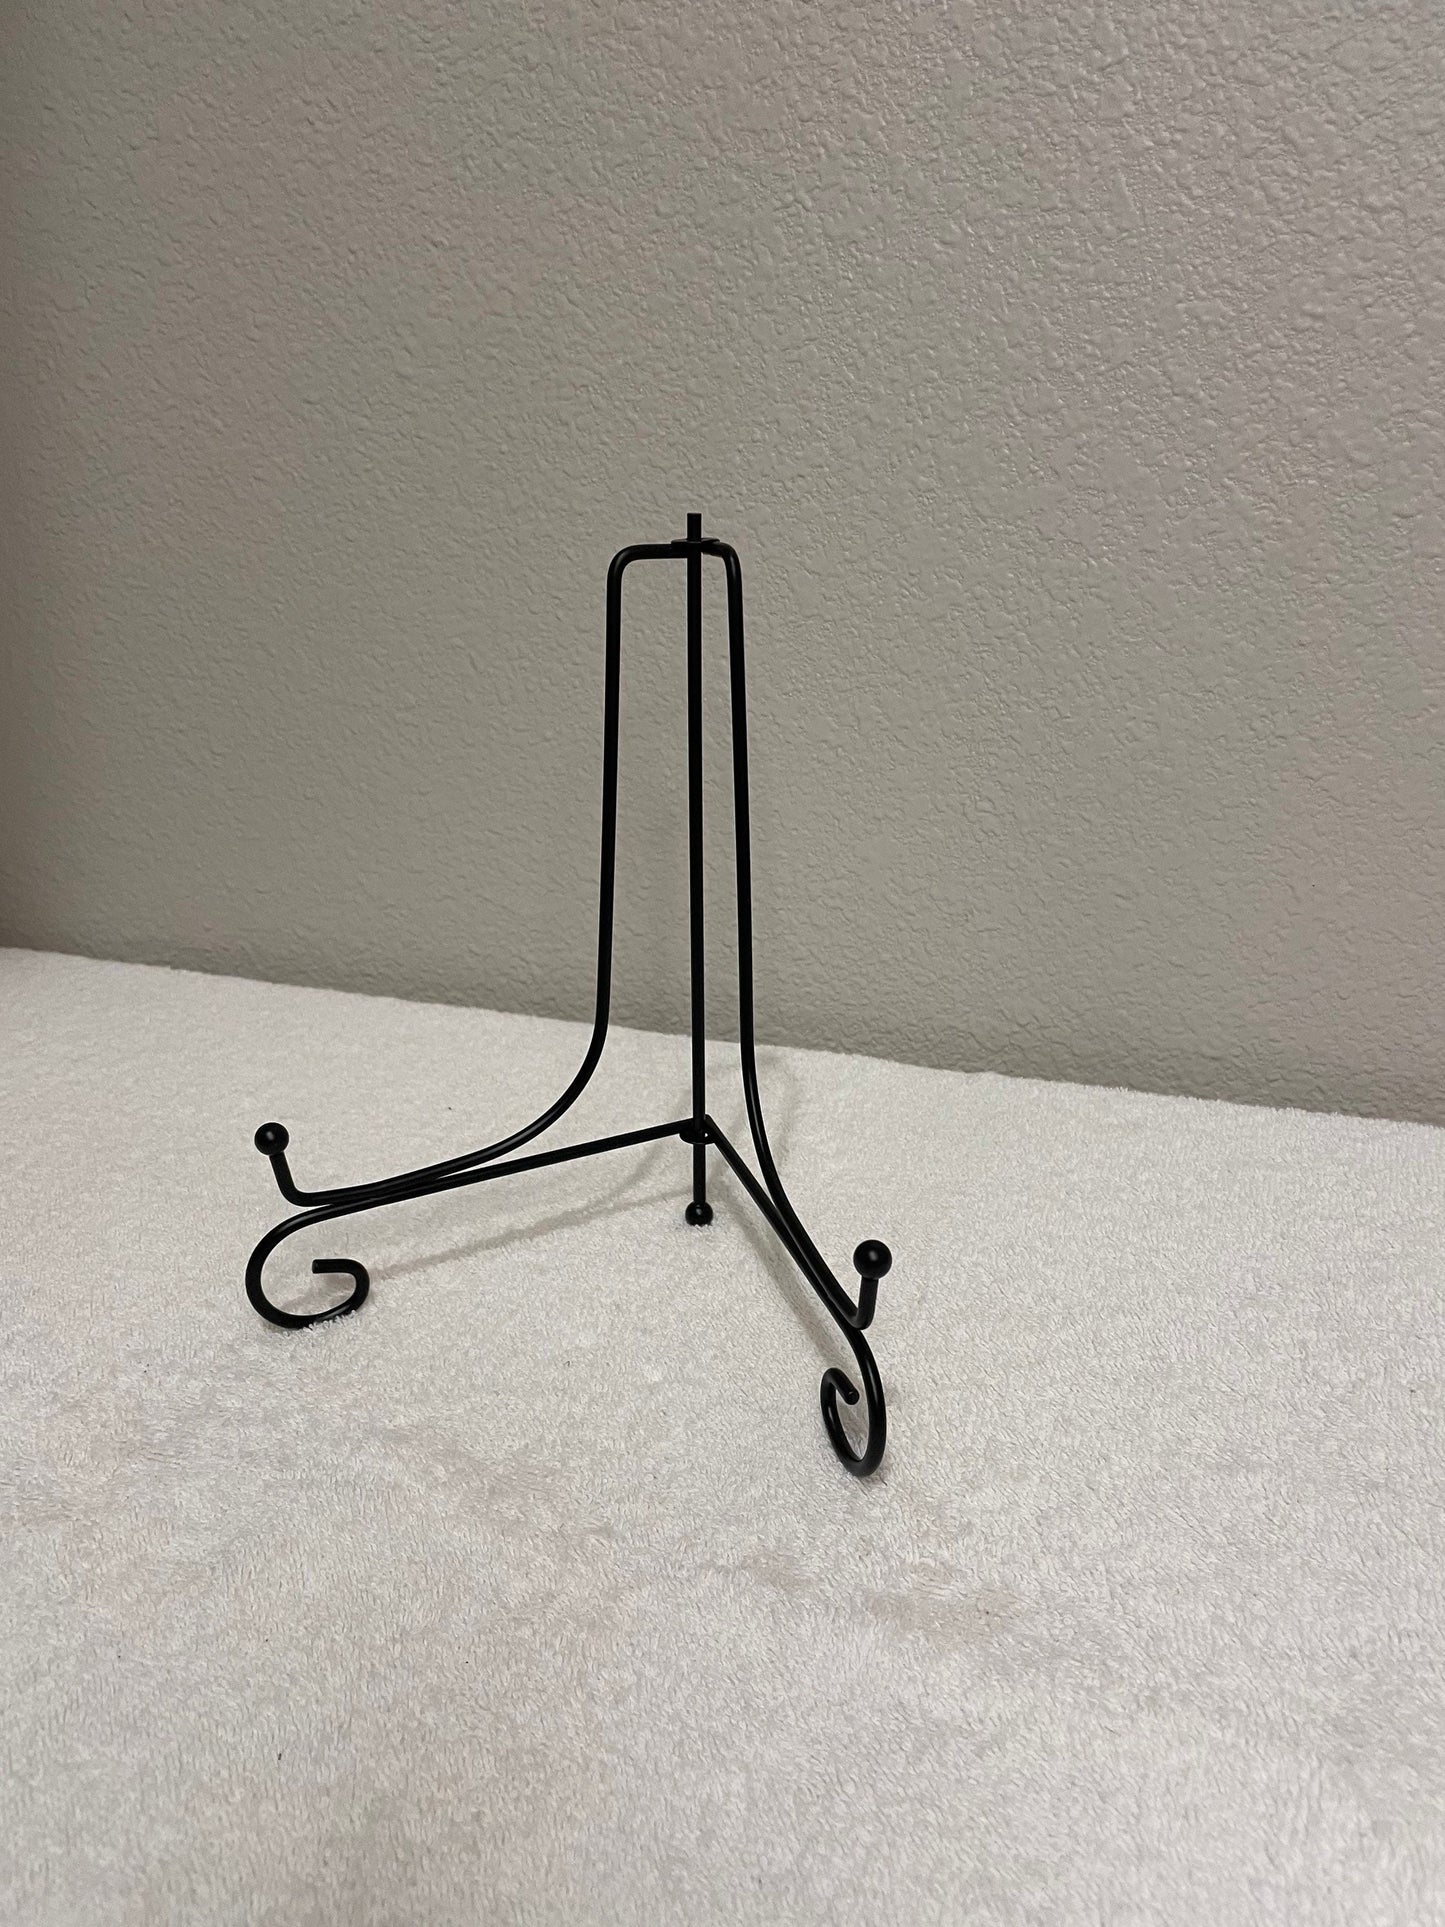 Iron Display Stand | Black Iron Stand | Display Stand | Different Sizes |